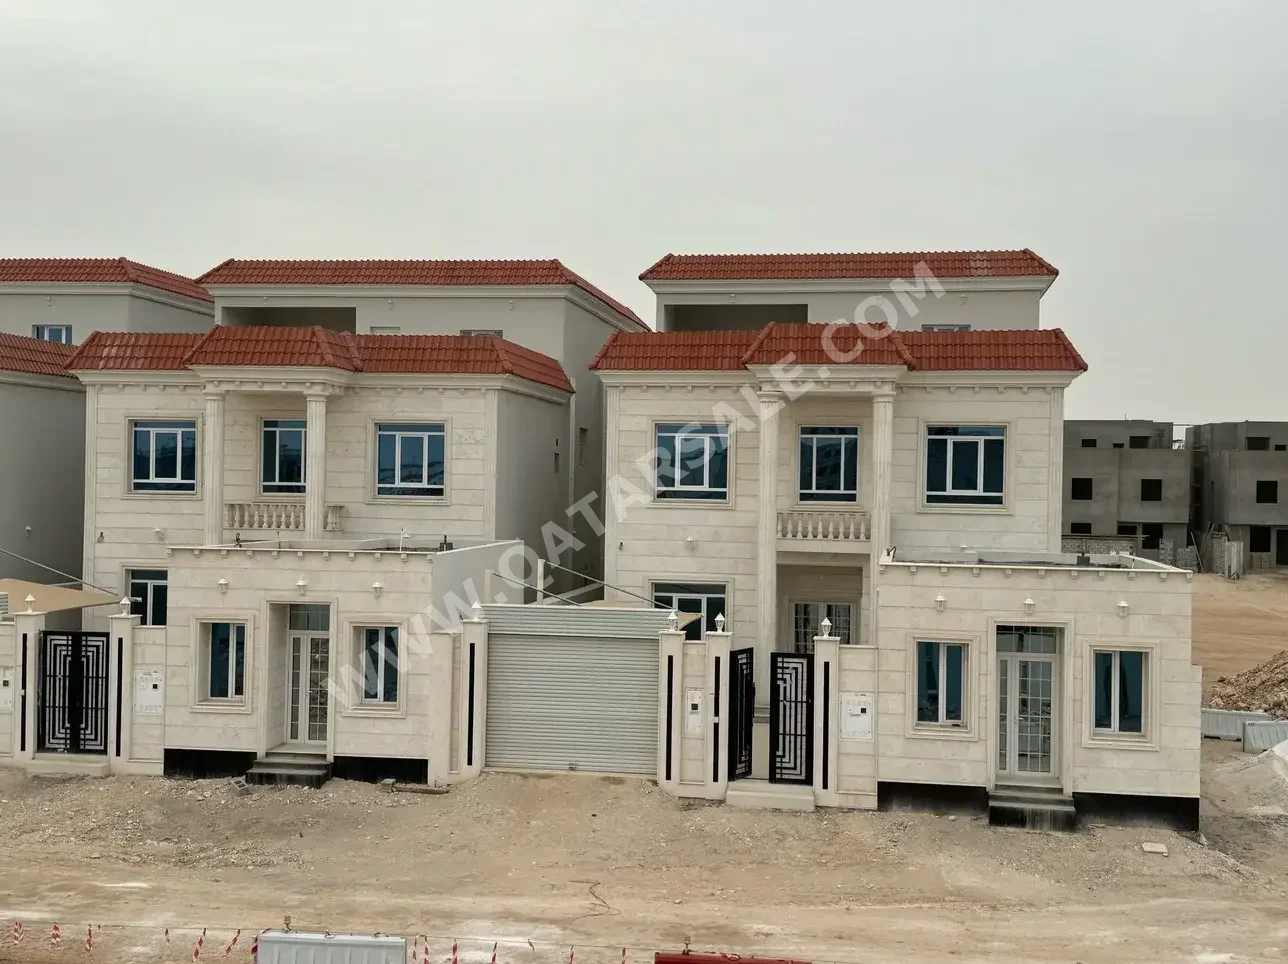 Family Residential  Not Furnished  Al Daayen  Umm Qarn  10 Bedrooms  Includes Water & Electricity